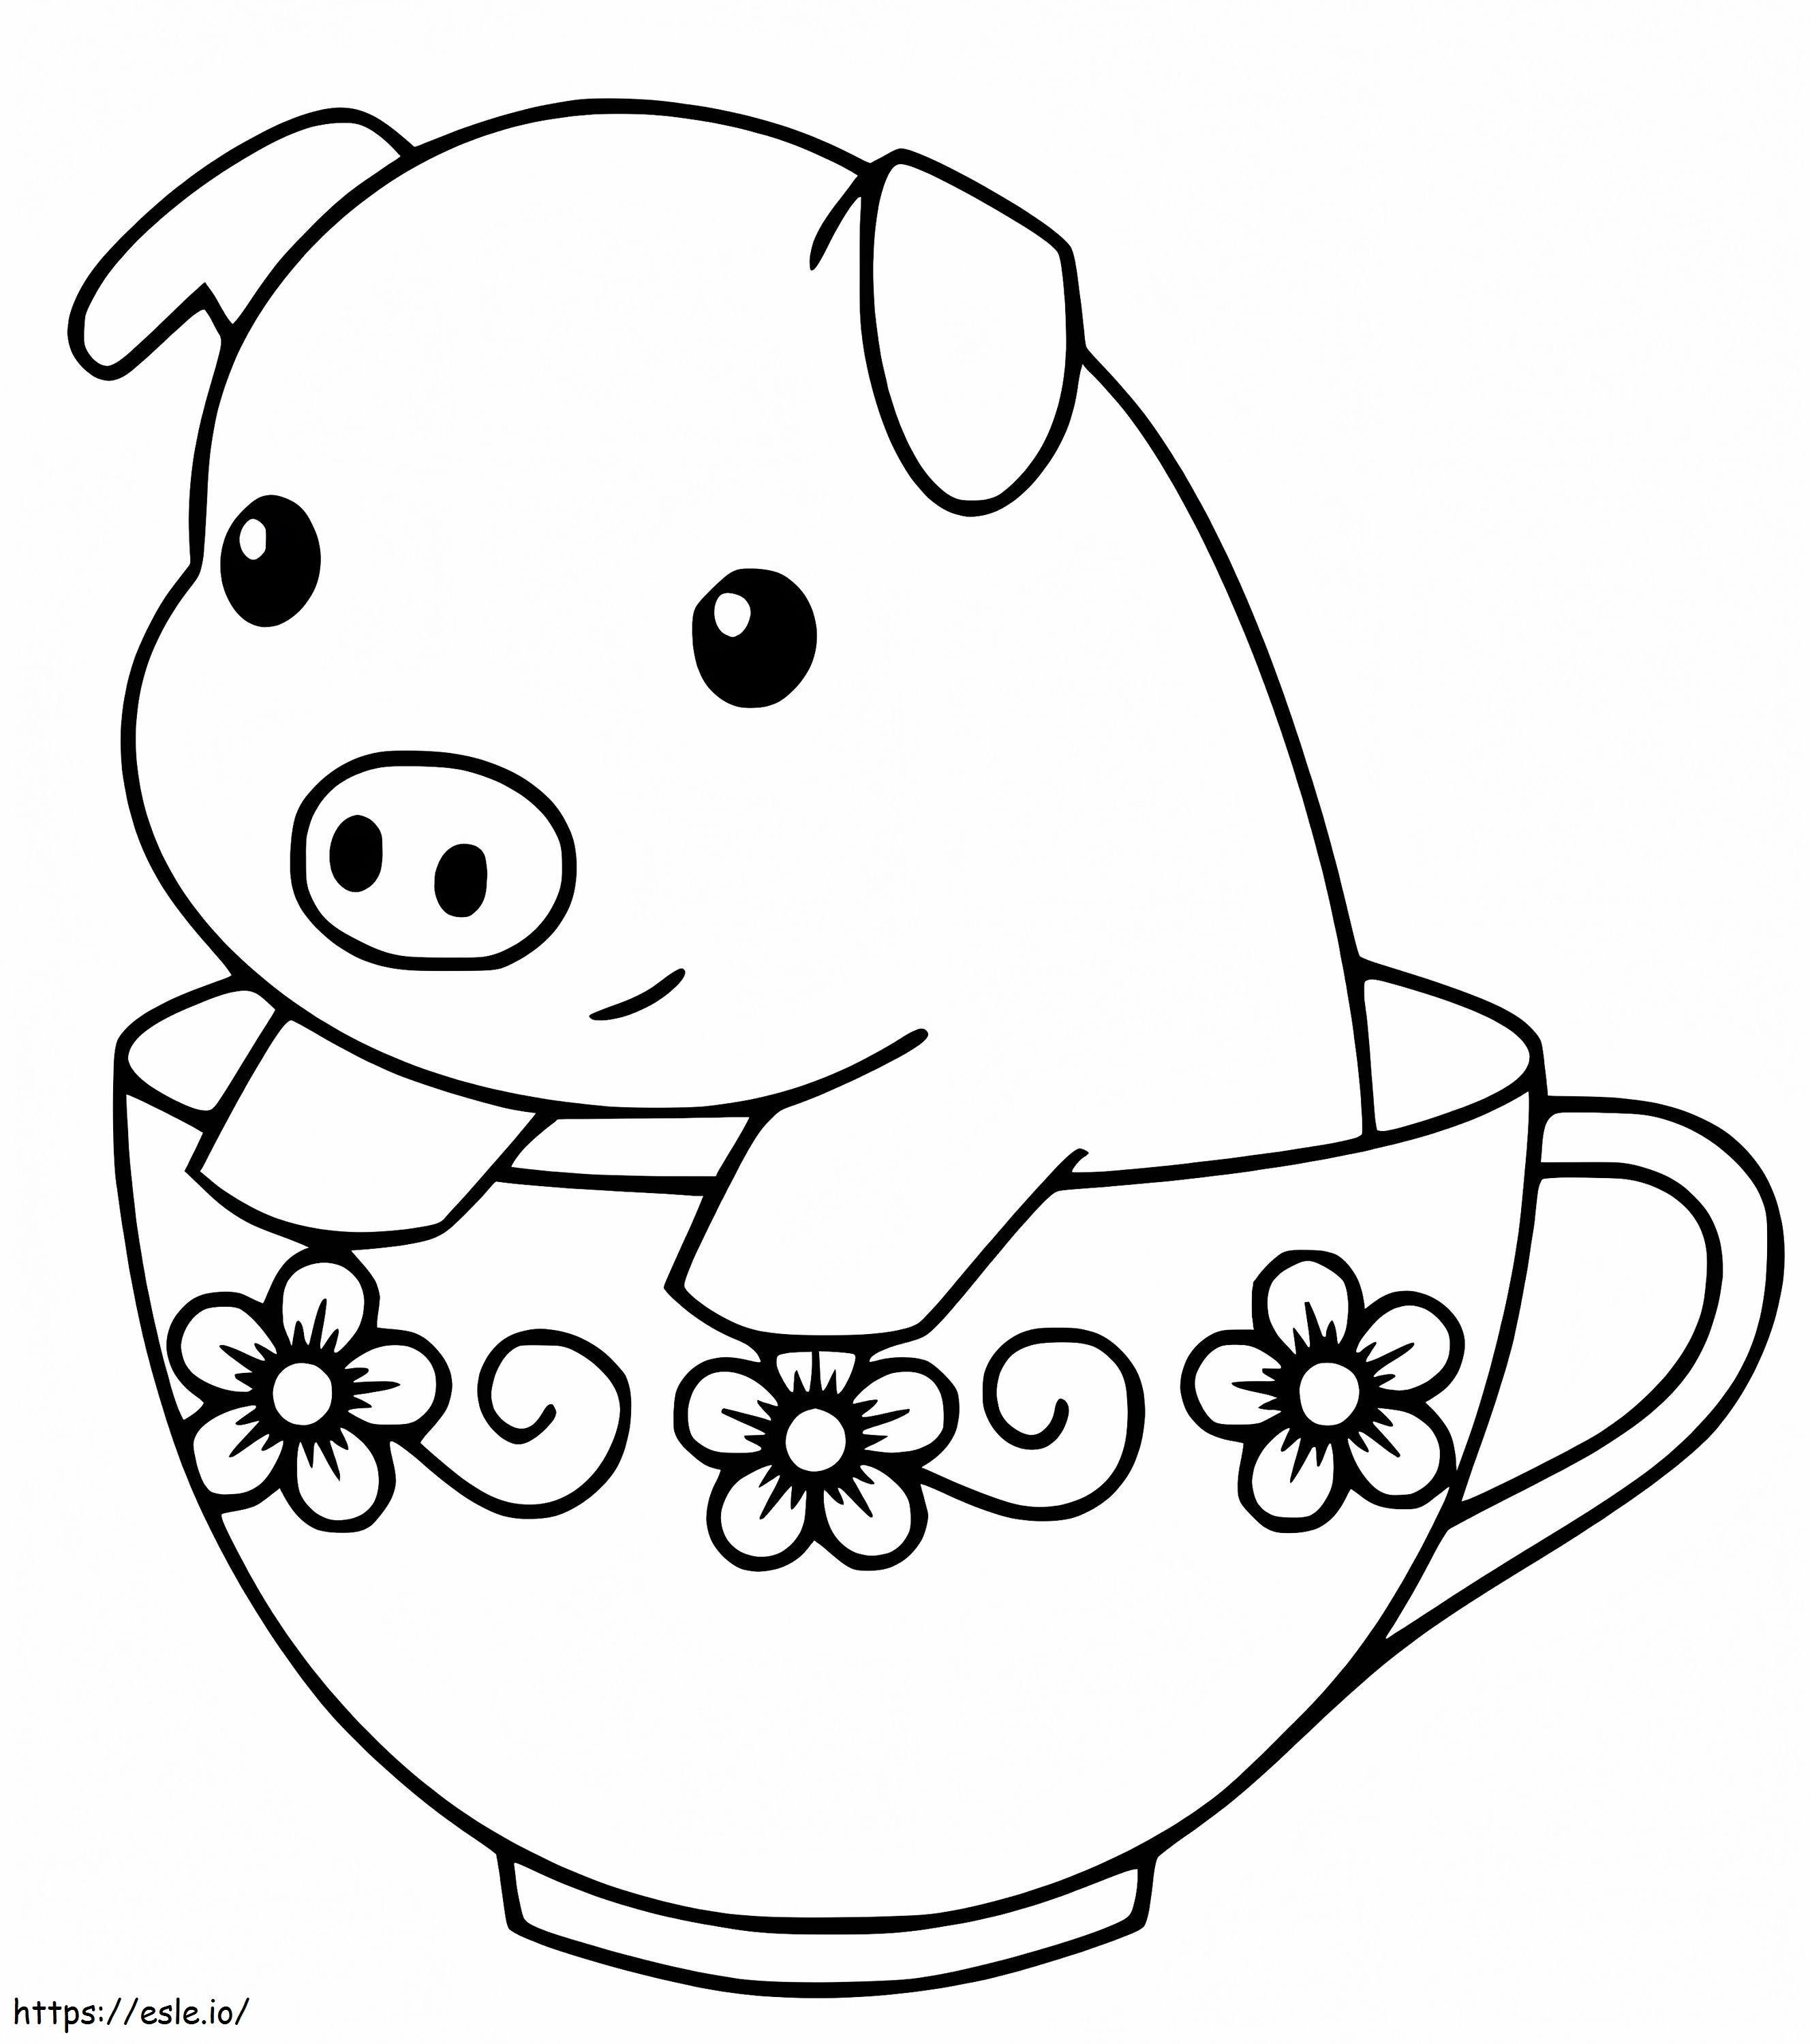 Baby Pig 9 coloring page